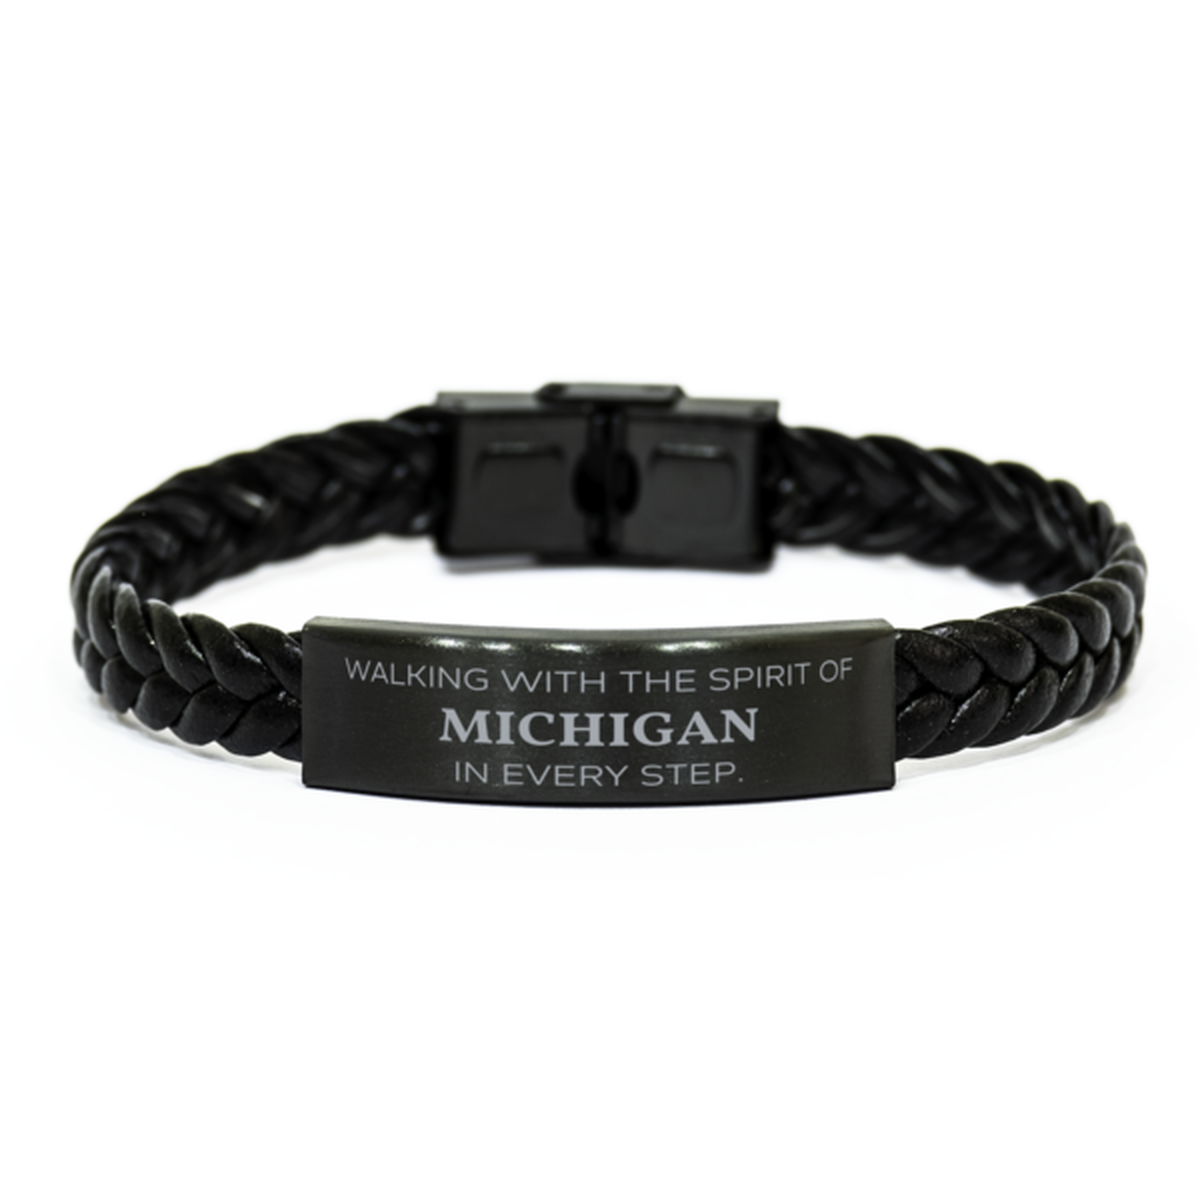 Michigan Gifts, Walking with the spirit, Love Michigan Birthday Christmas Braided Leather Bracelet For Michigan People, Men, Women, Friends